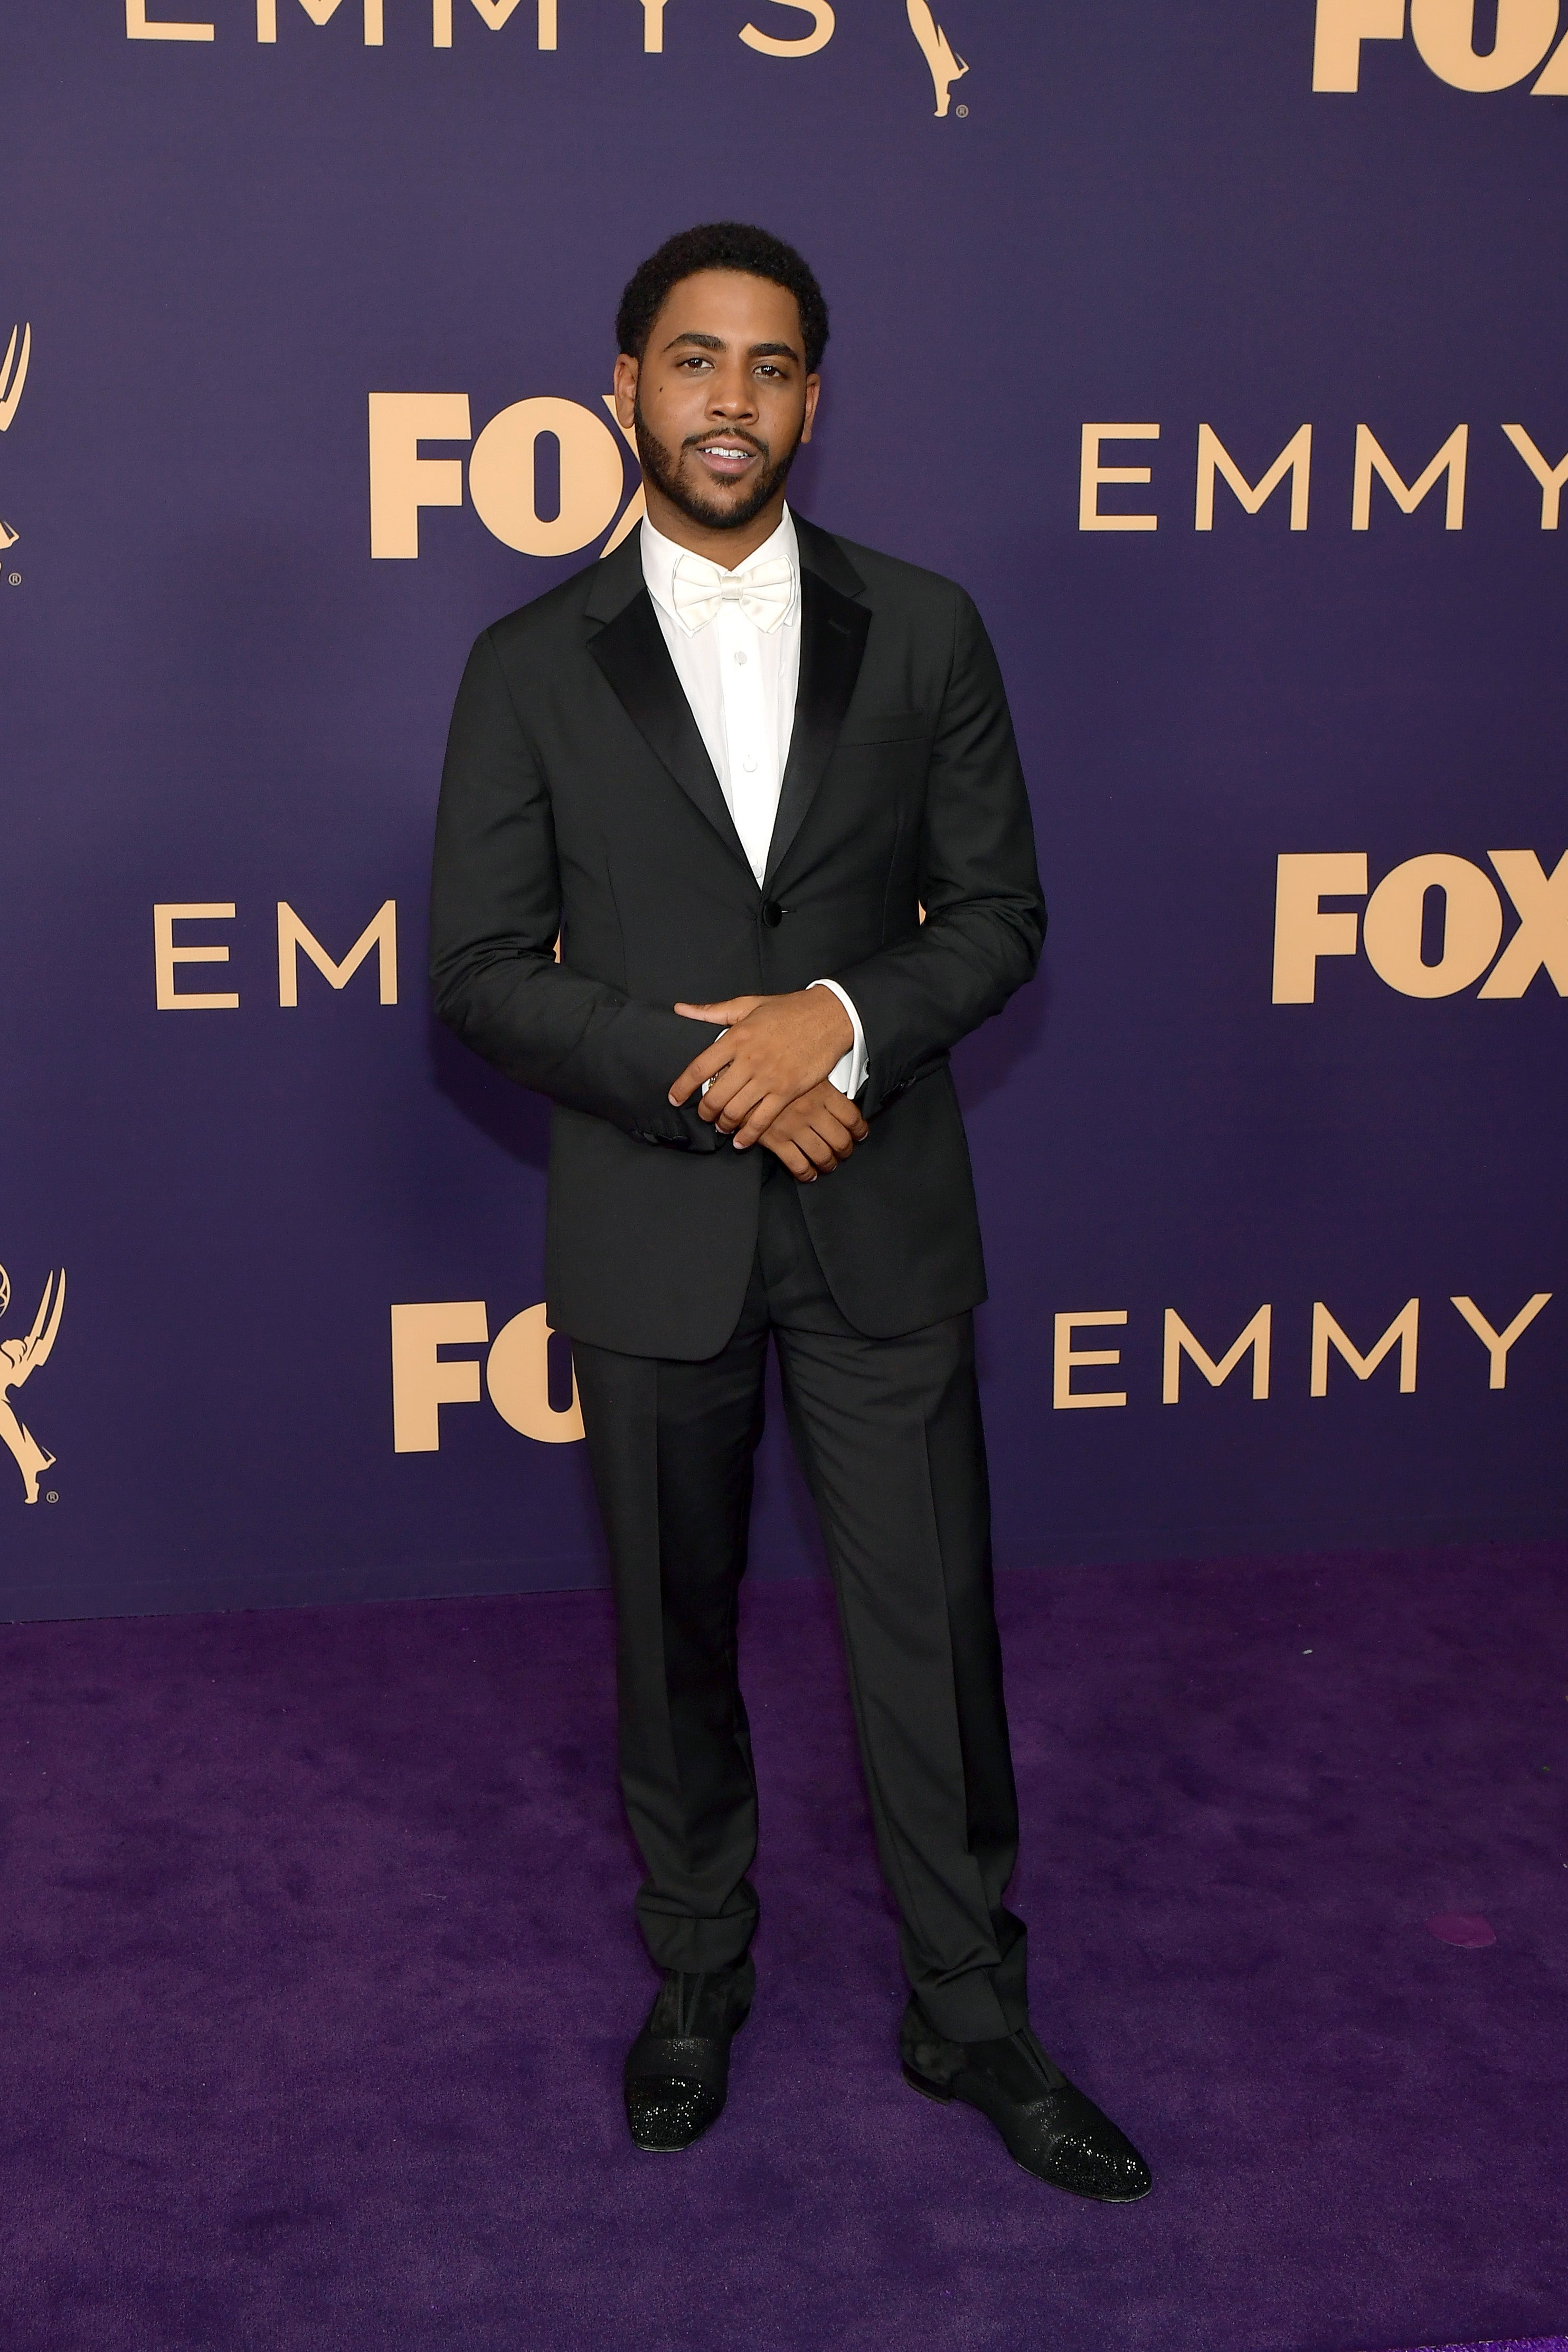 Exclusive: Behind ‘When They See Us’ Star Jharrel Jerome’s Emmy-Winning Look